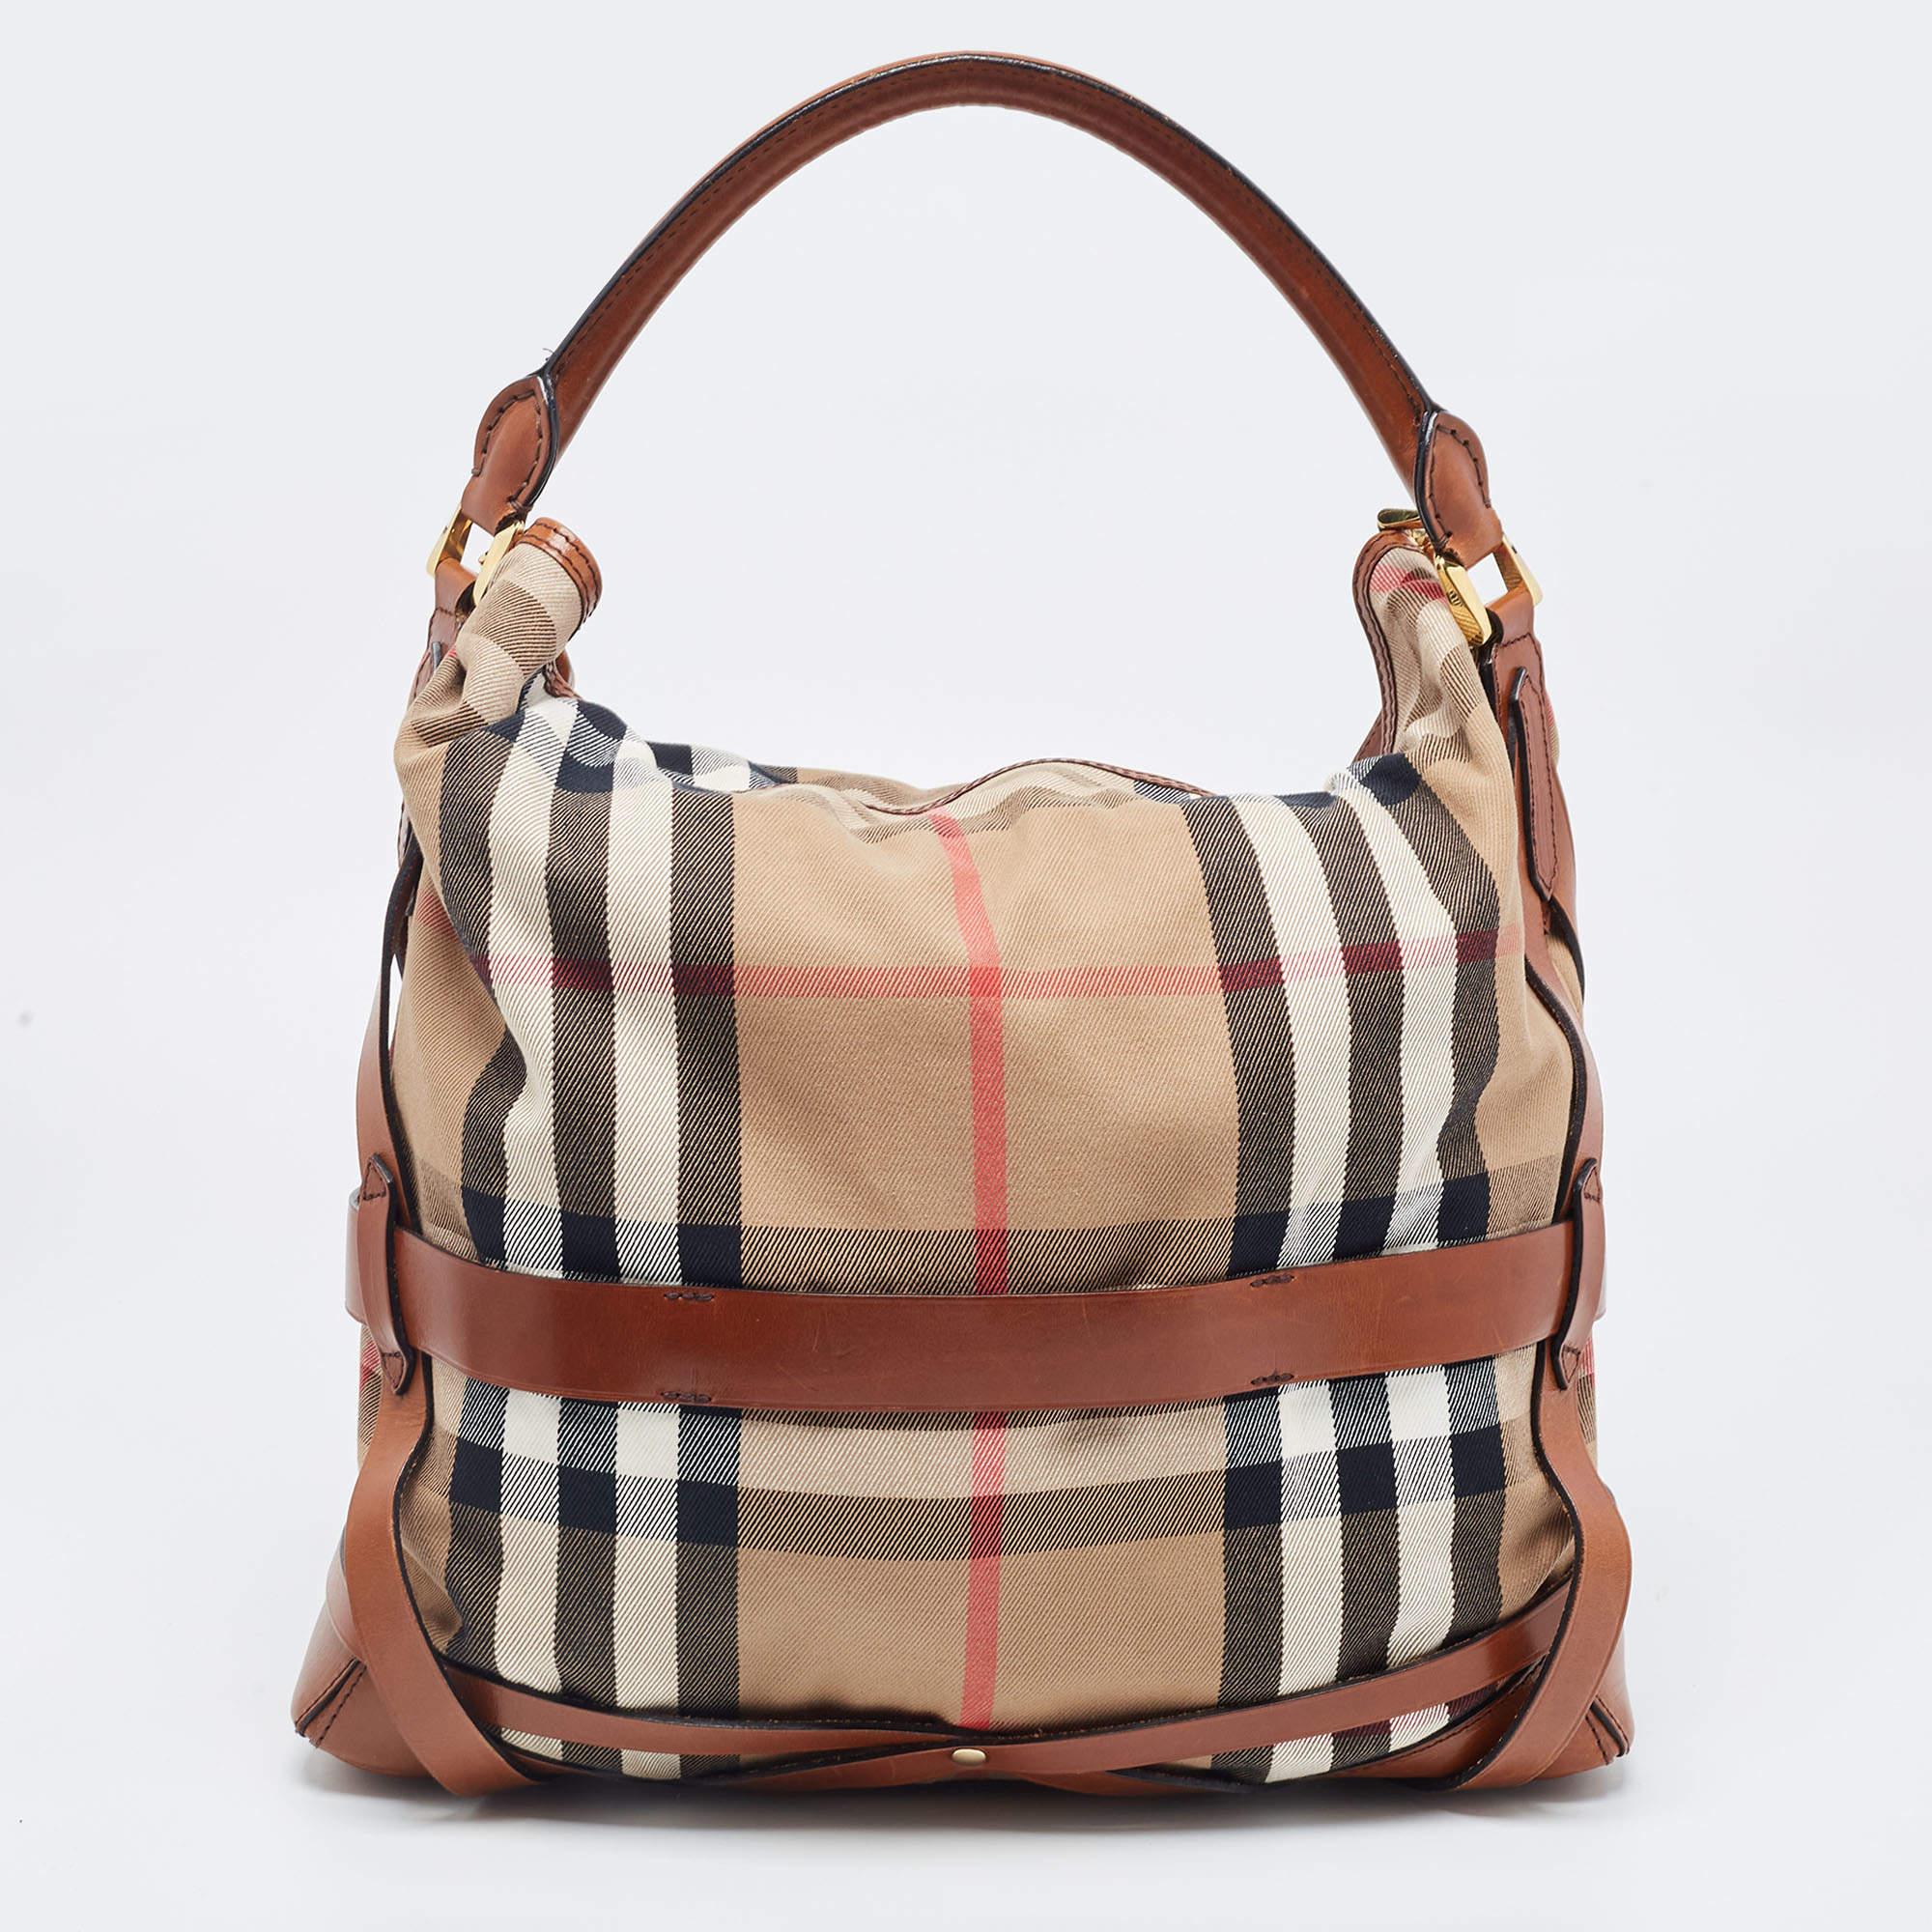 This Bridle Gosford hobo from Burberry might just be your next favorite bag! It is both high in style and is functional enough to accompany you on all days. It is made from beige-brown House Check canvas and leather, paired with gold-tone hardware.

